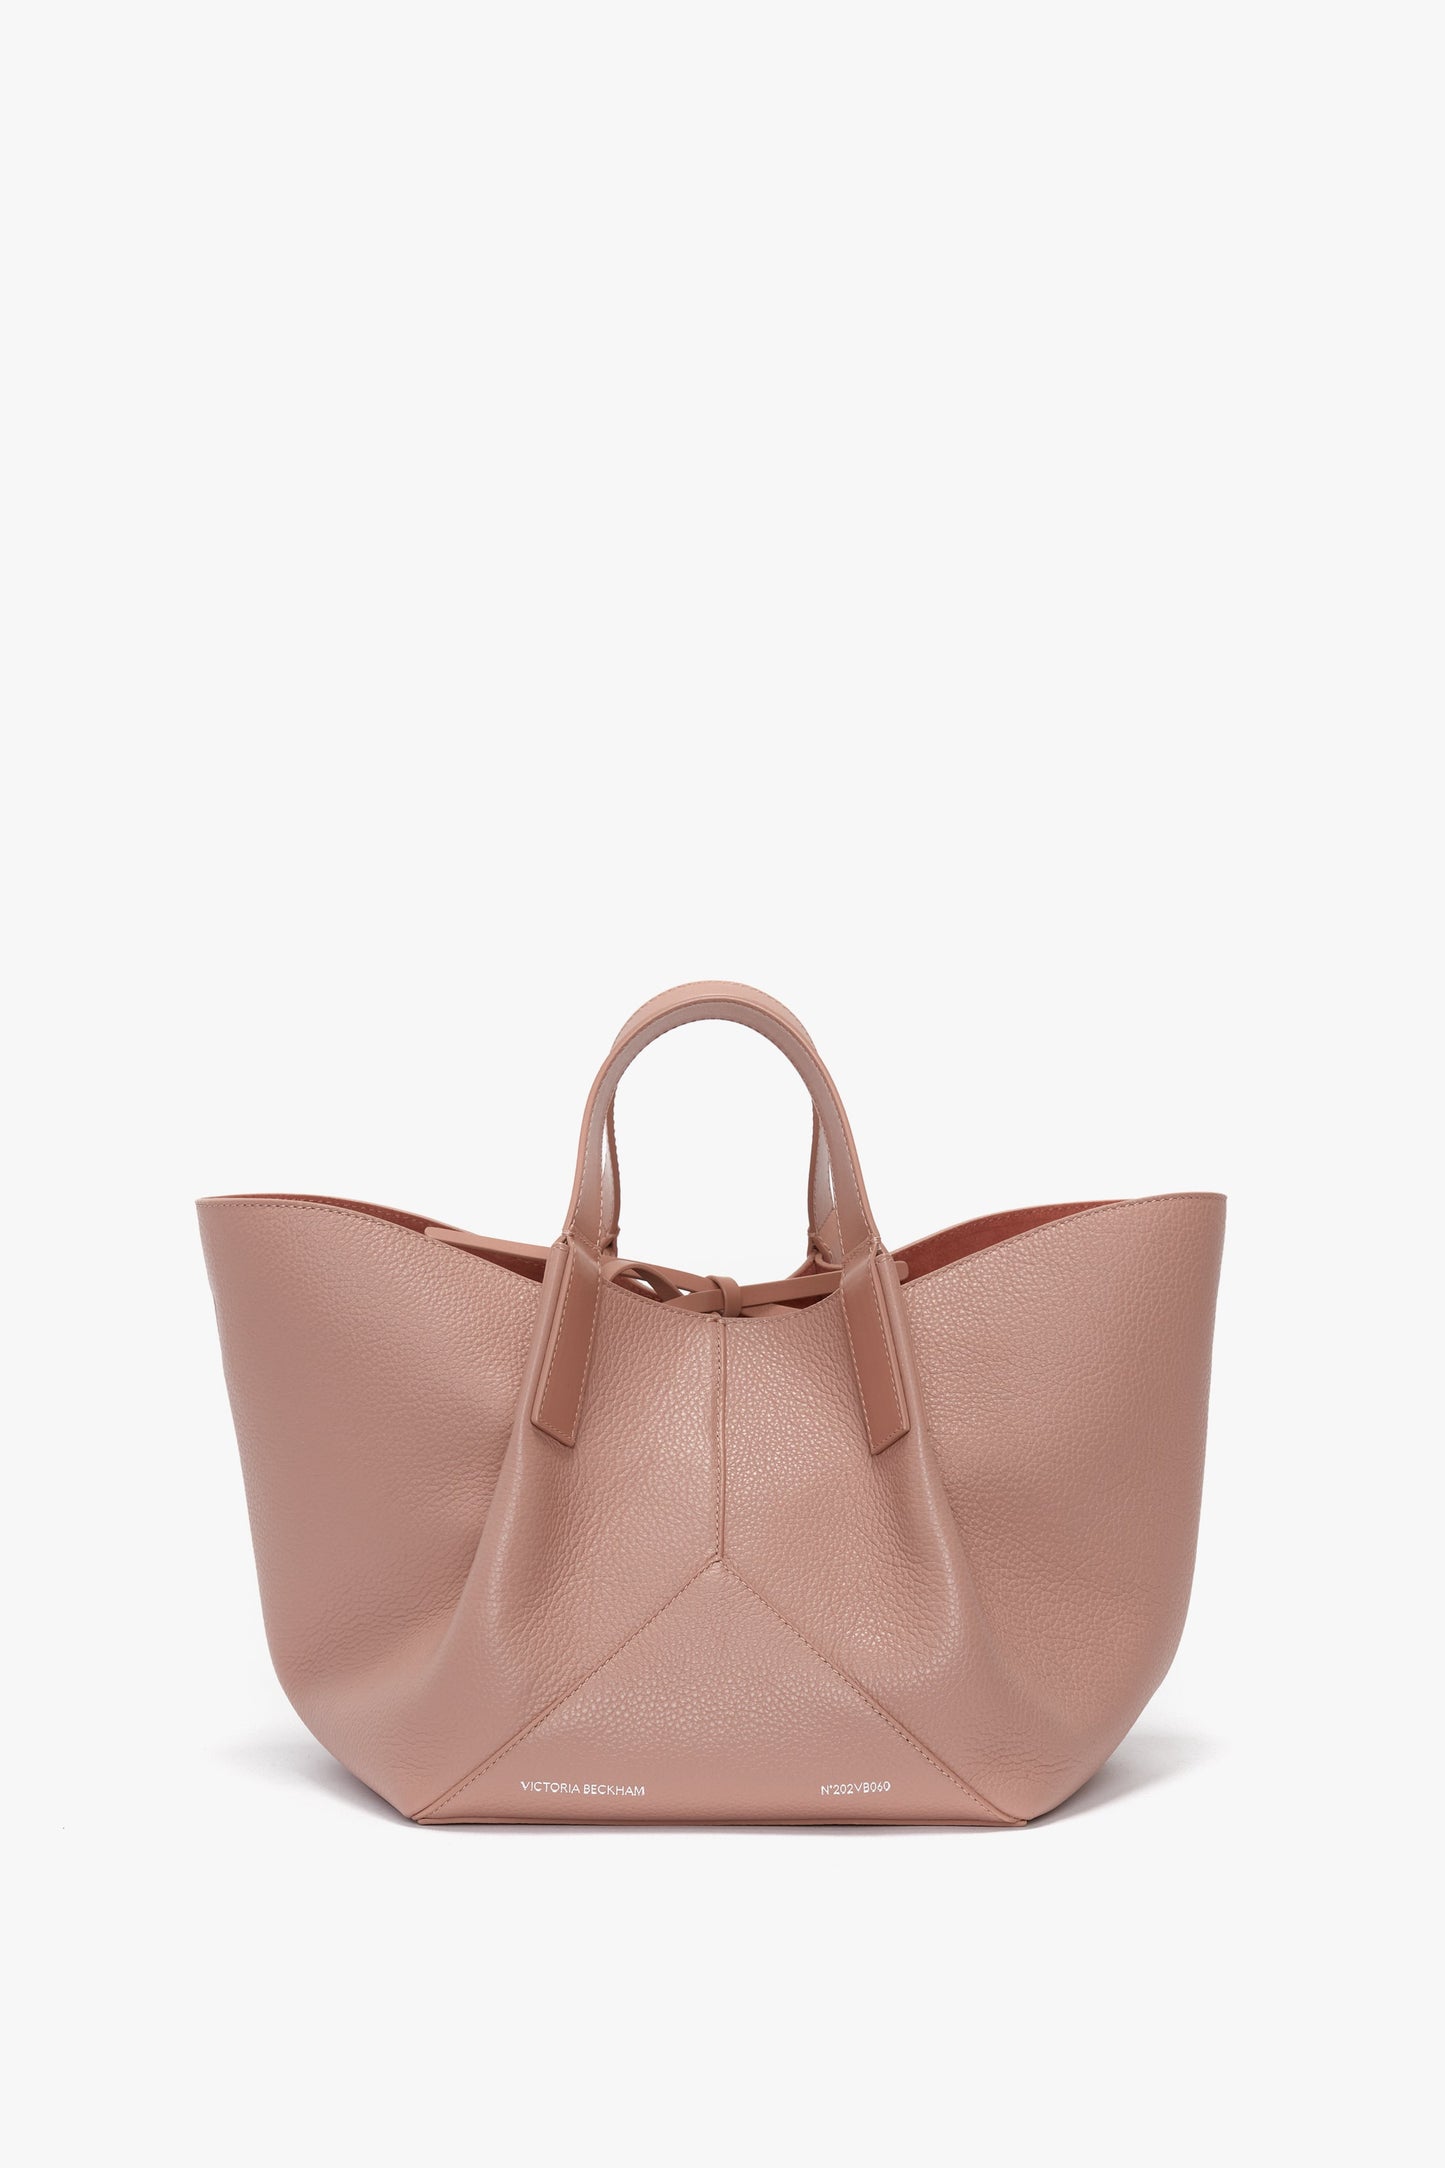 A blush pink Victoria Beckham W11 Mini Tote Bag In Marshmallow Leather, crafted from structured calf leather, features short handles and a spacious, wide-open design displayed on a white background.